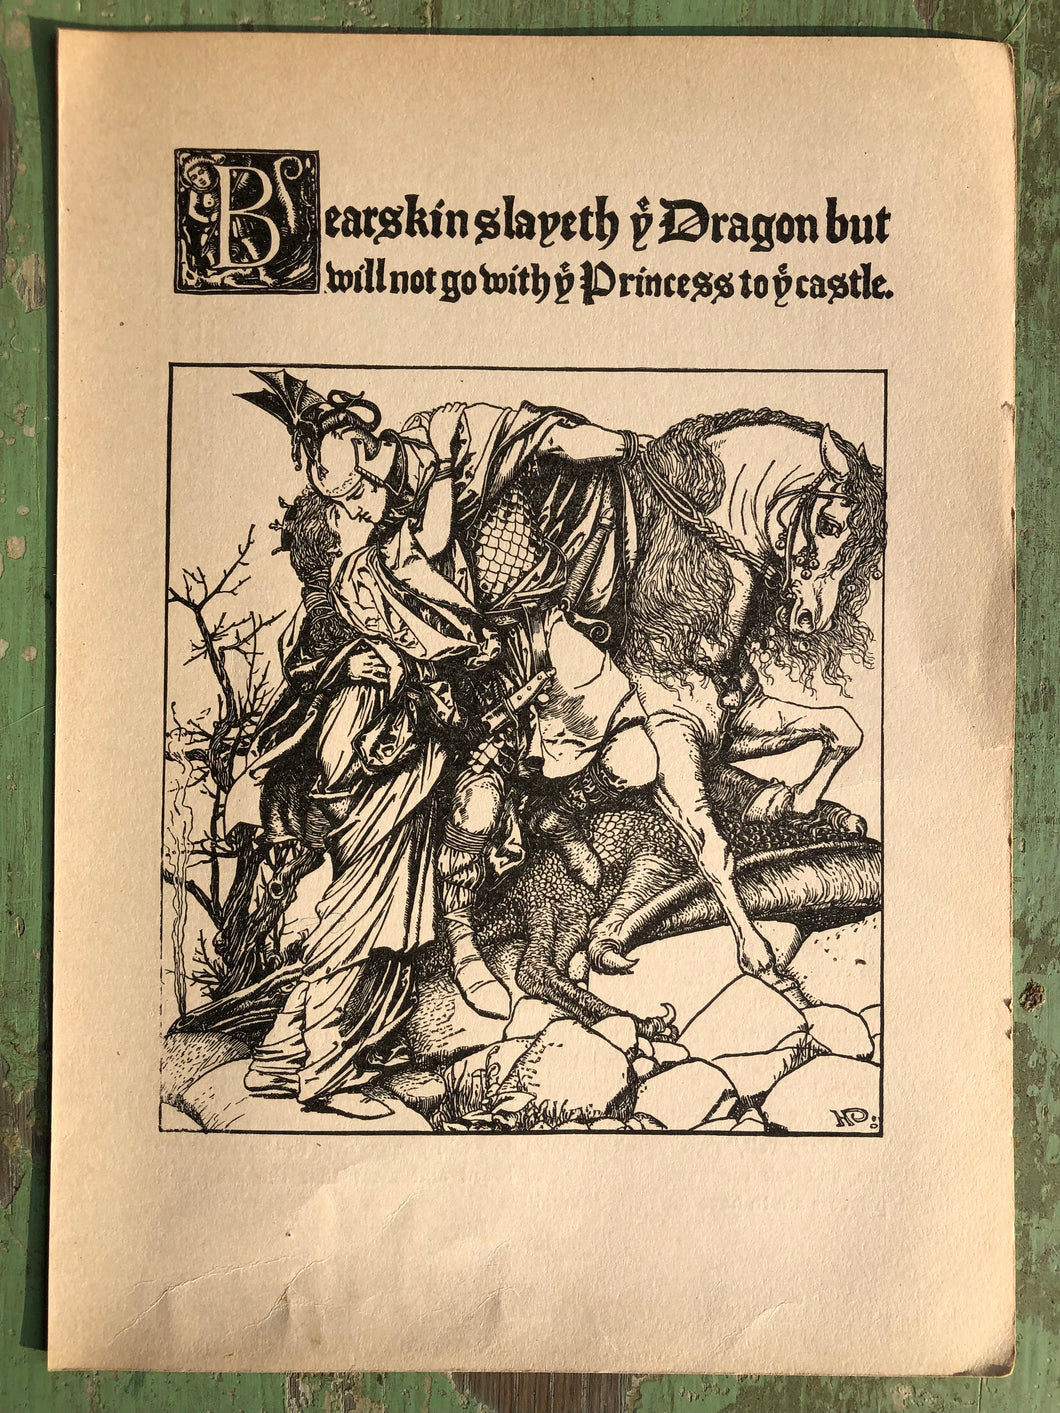 Double-sided Print from The Wonder Clock by Howard Pyle